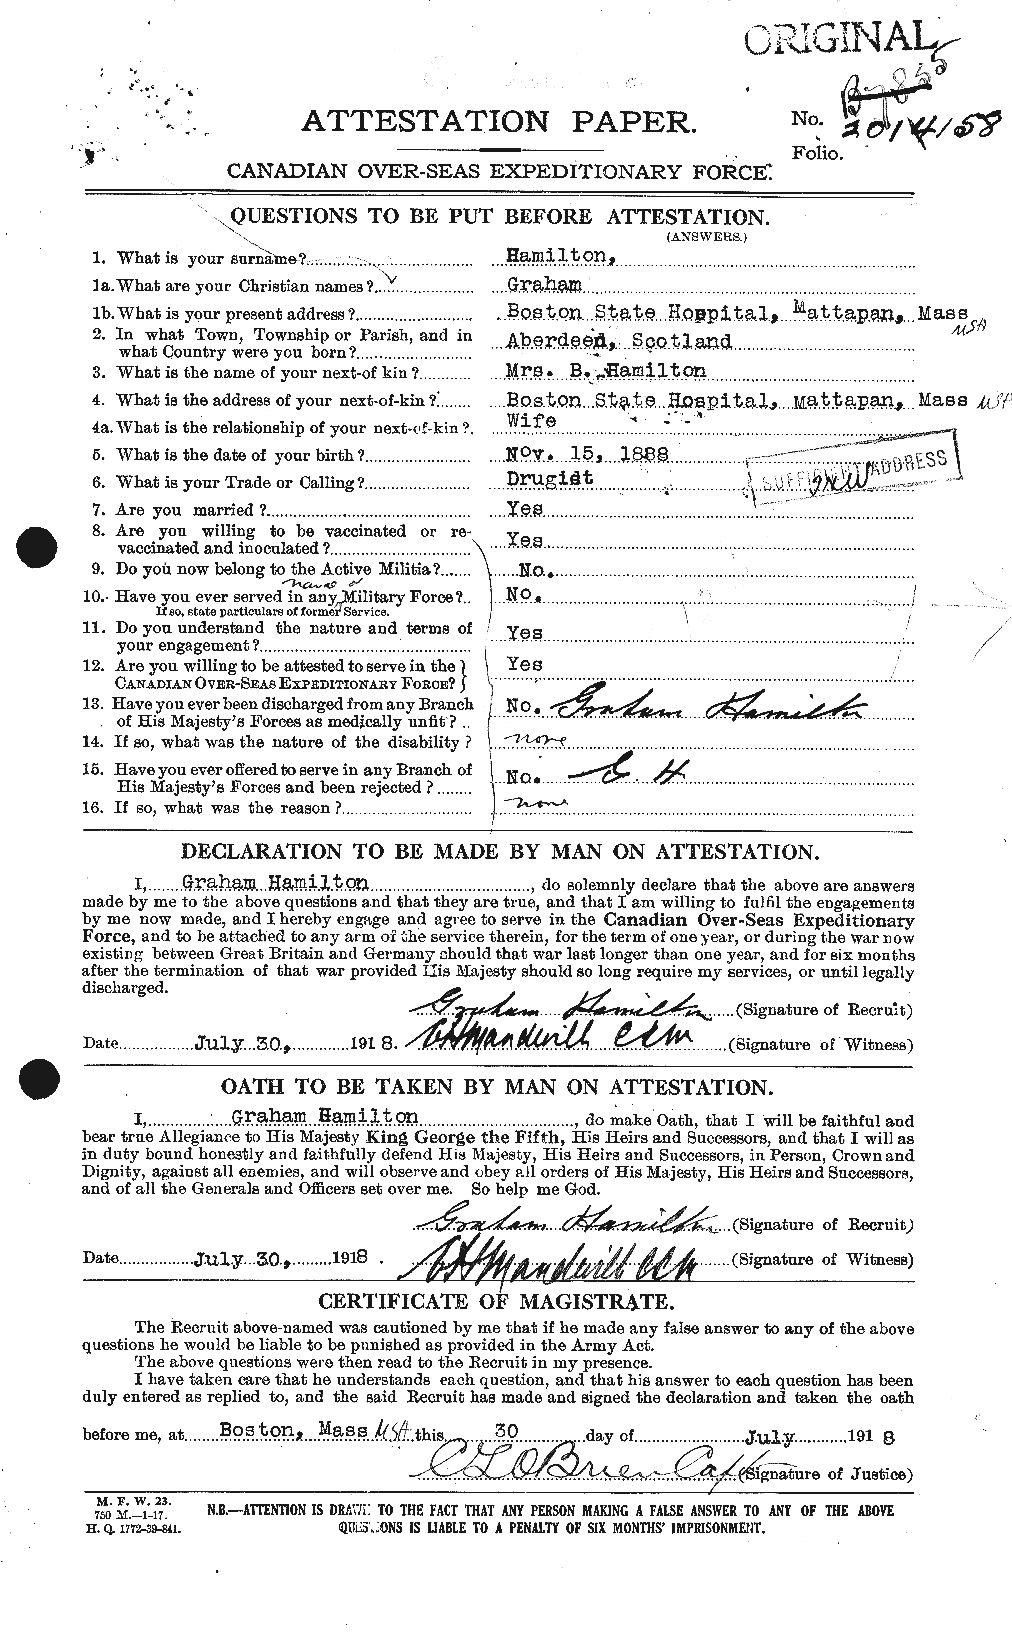 Personnel Records of the First World War - CEF 372485a